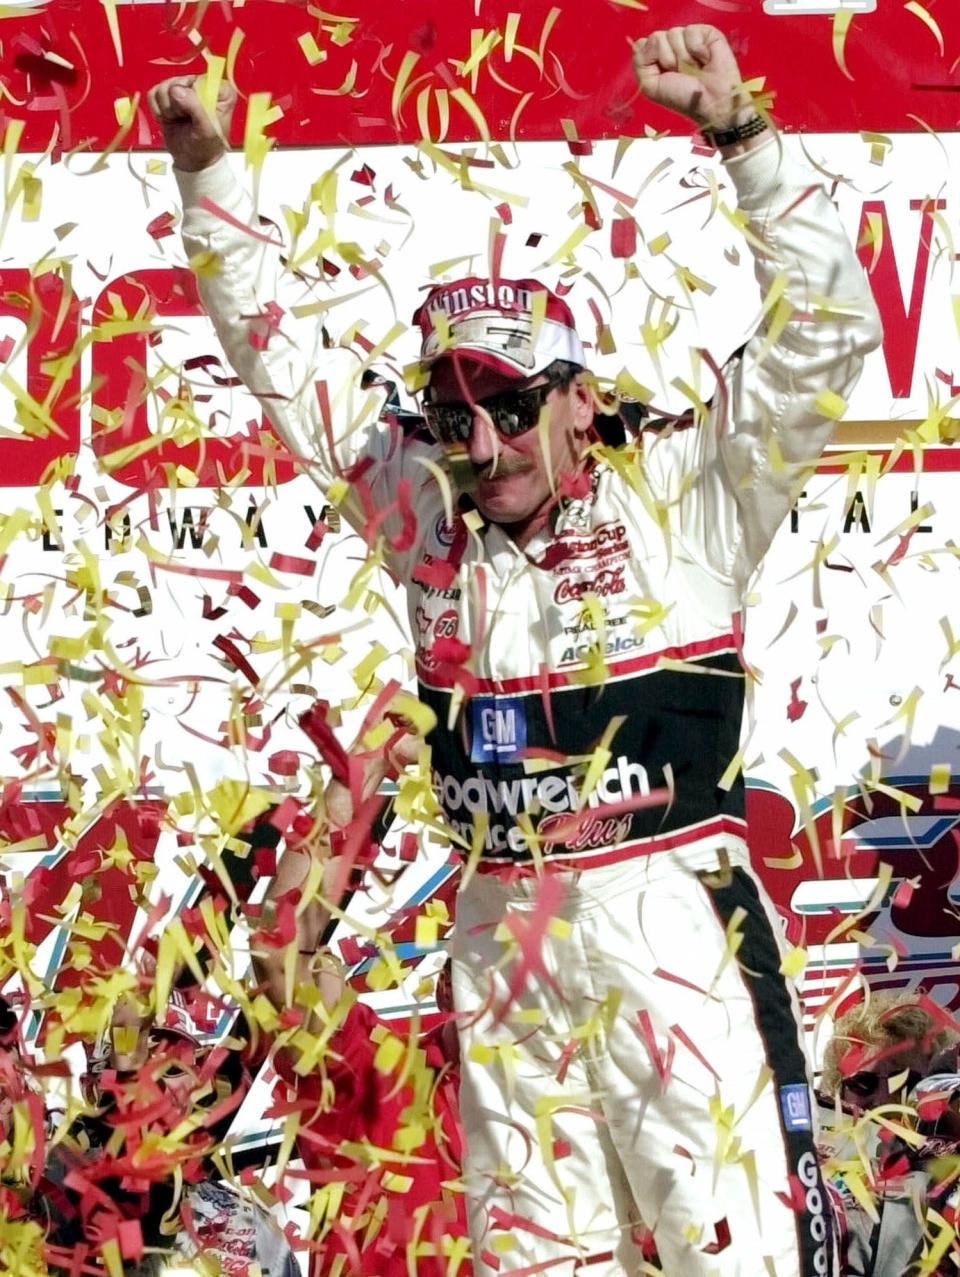 Dale Earnhardt celebrated his final NASCAR Cup Series win at Talladega on Oct. 15, 2000.